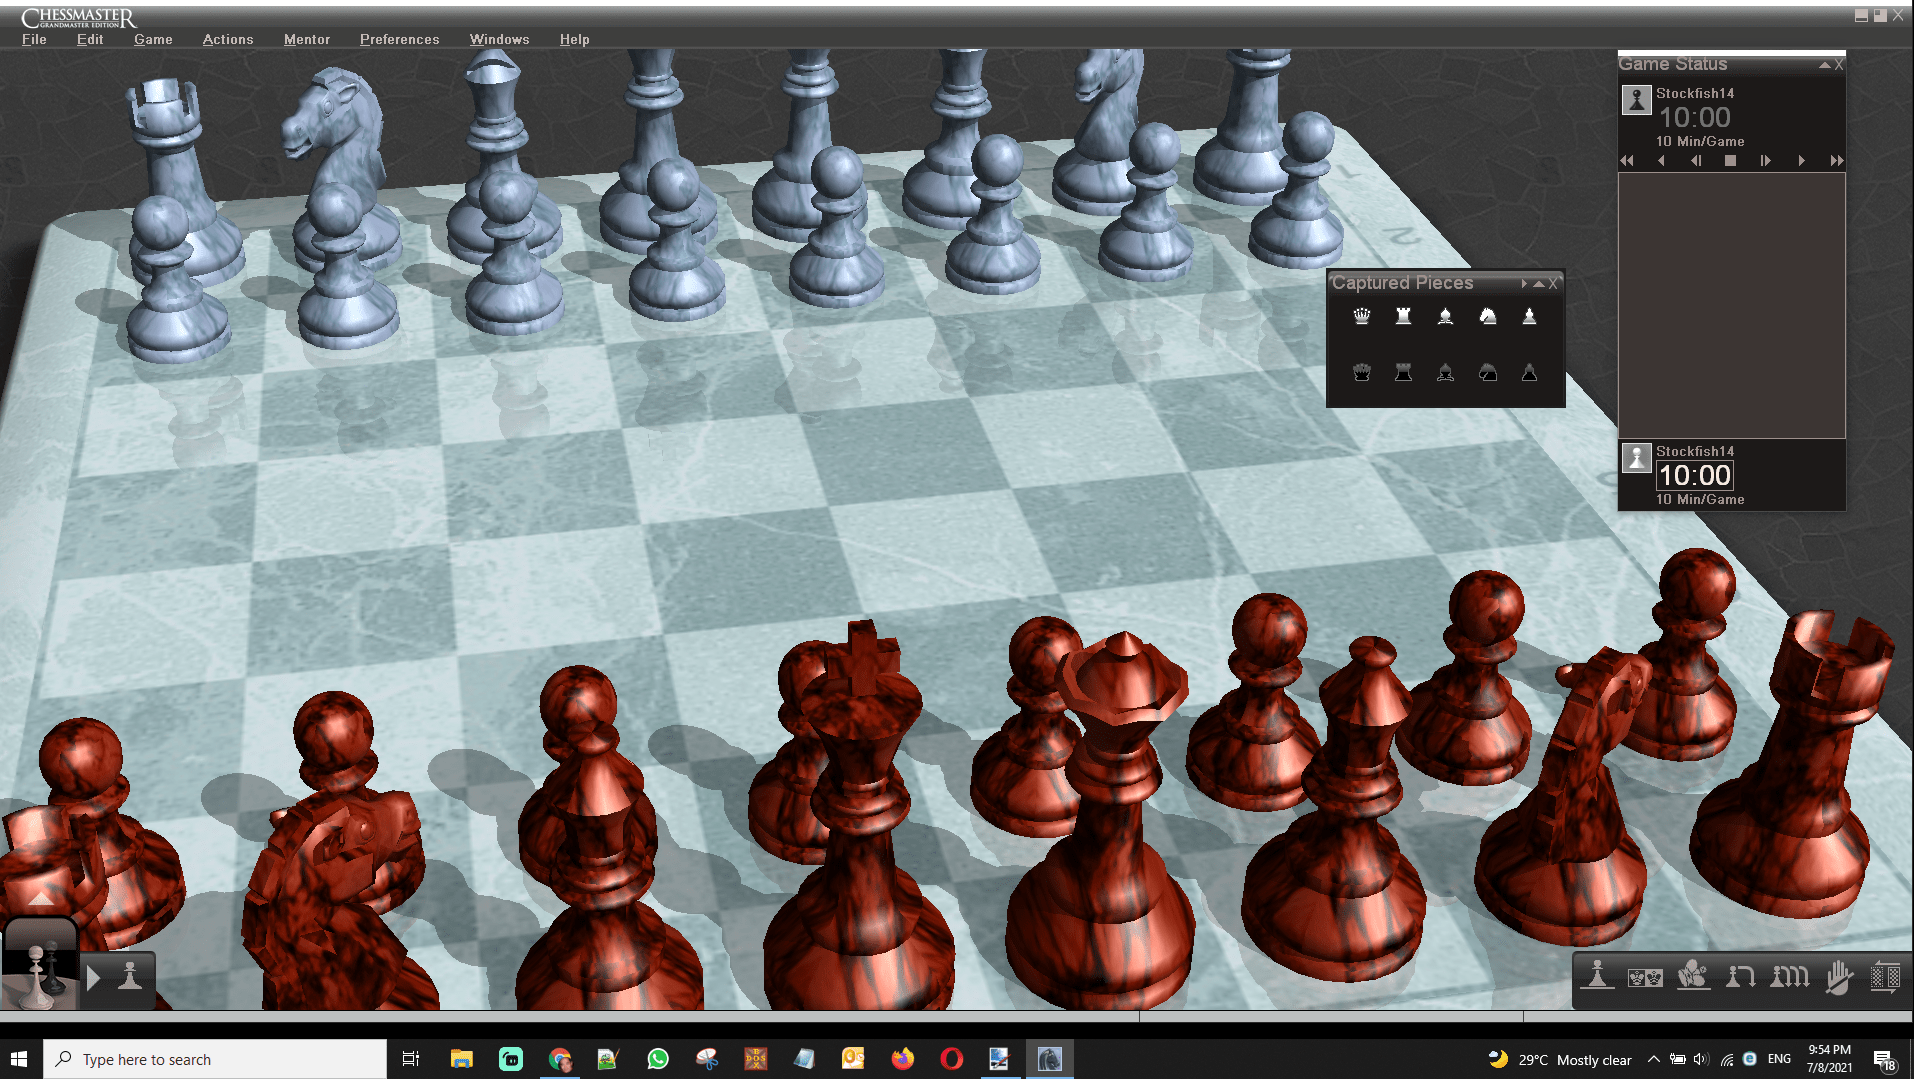 PC / Computer - Chessmaster: Grandmaster Edition - The Sounds Resource